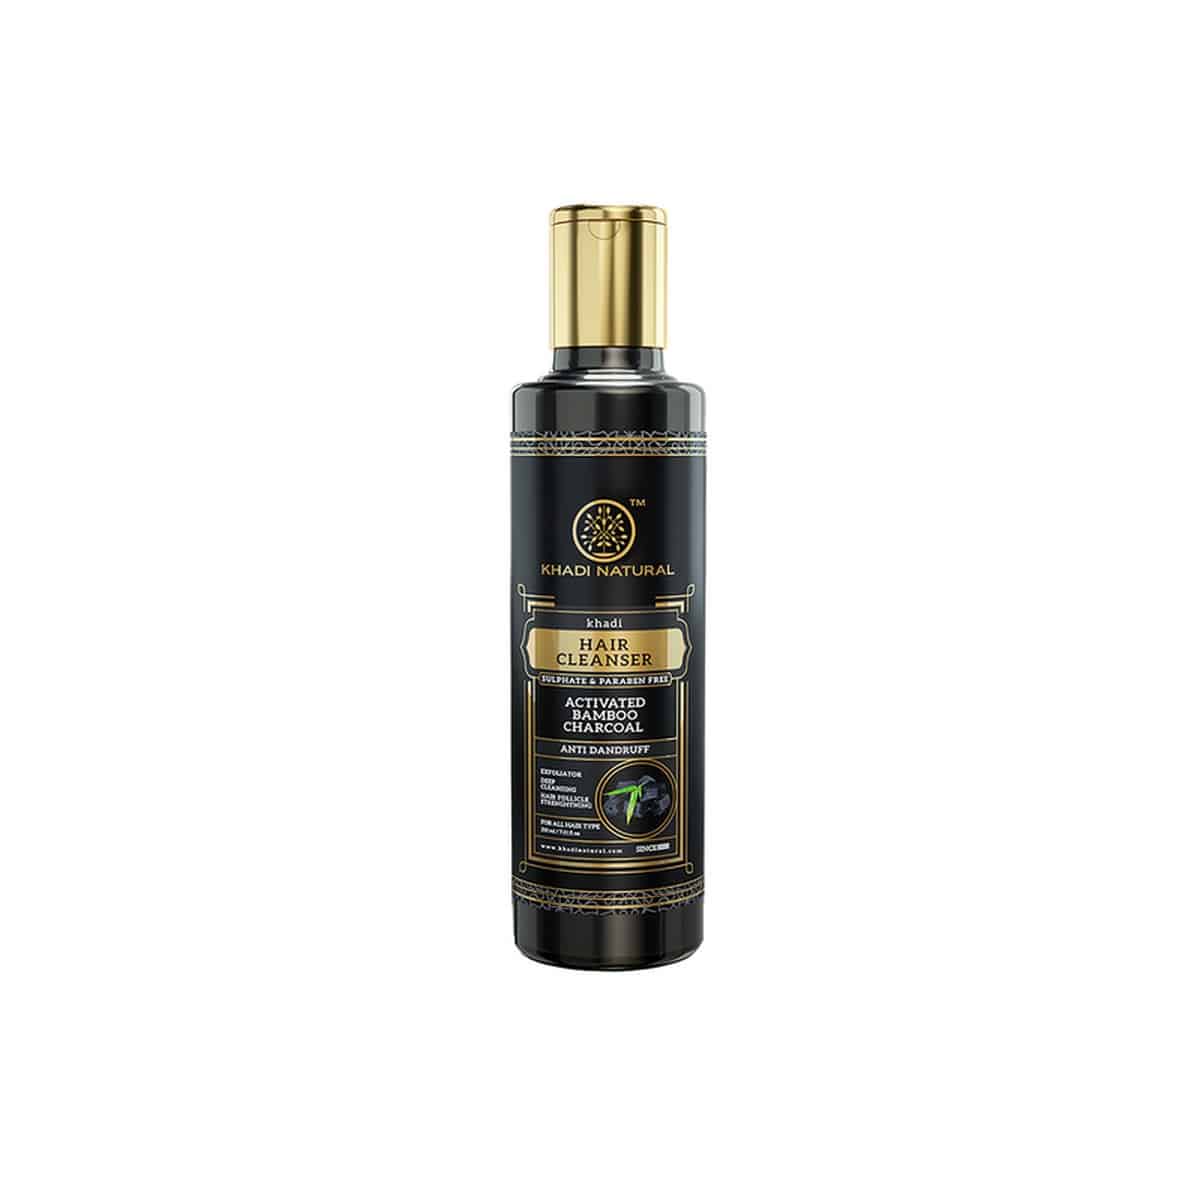 Khadi Natural Activated Bamboo Charcoal Hair Cleanser